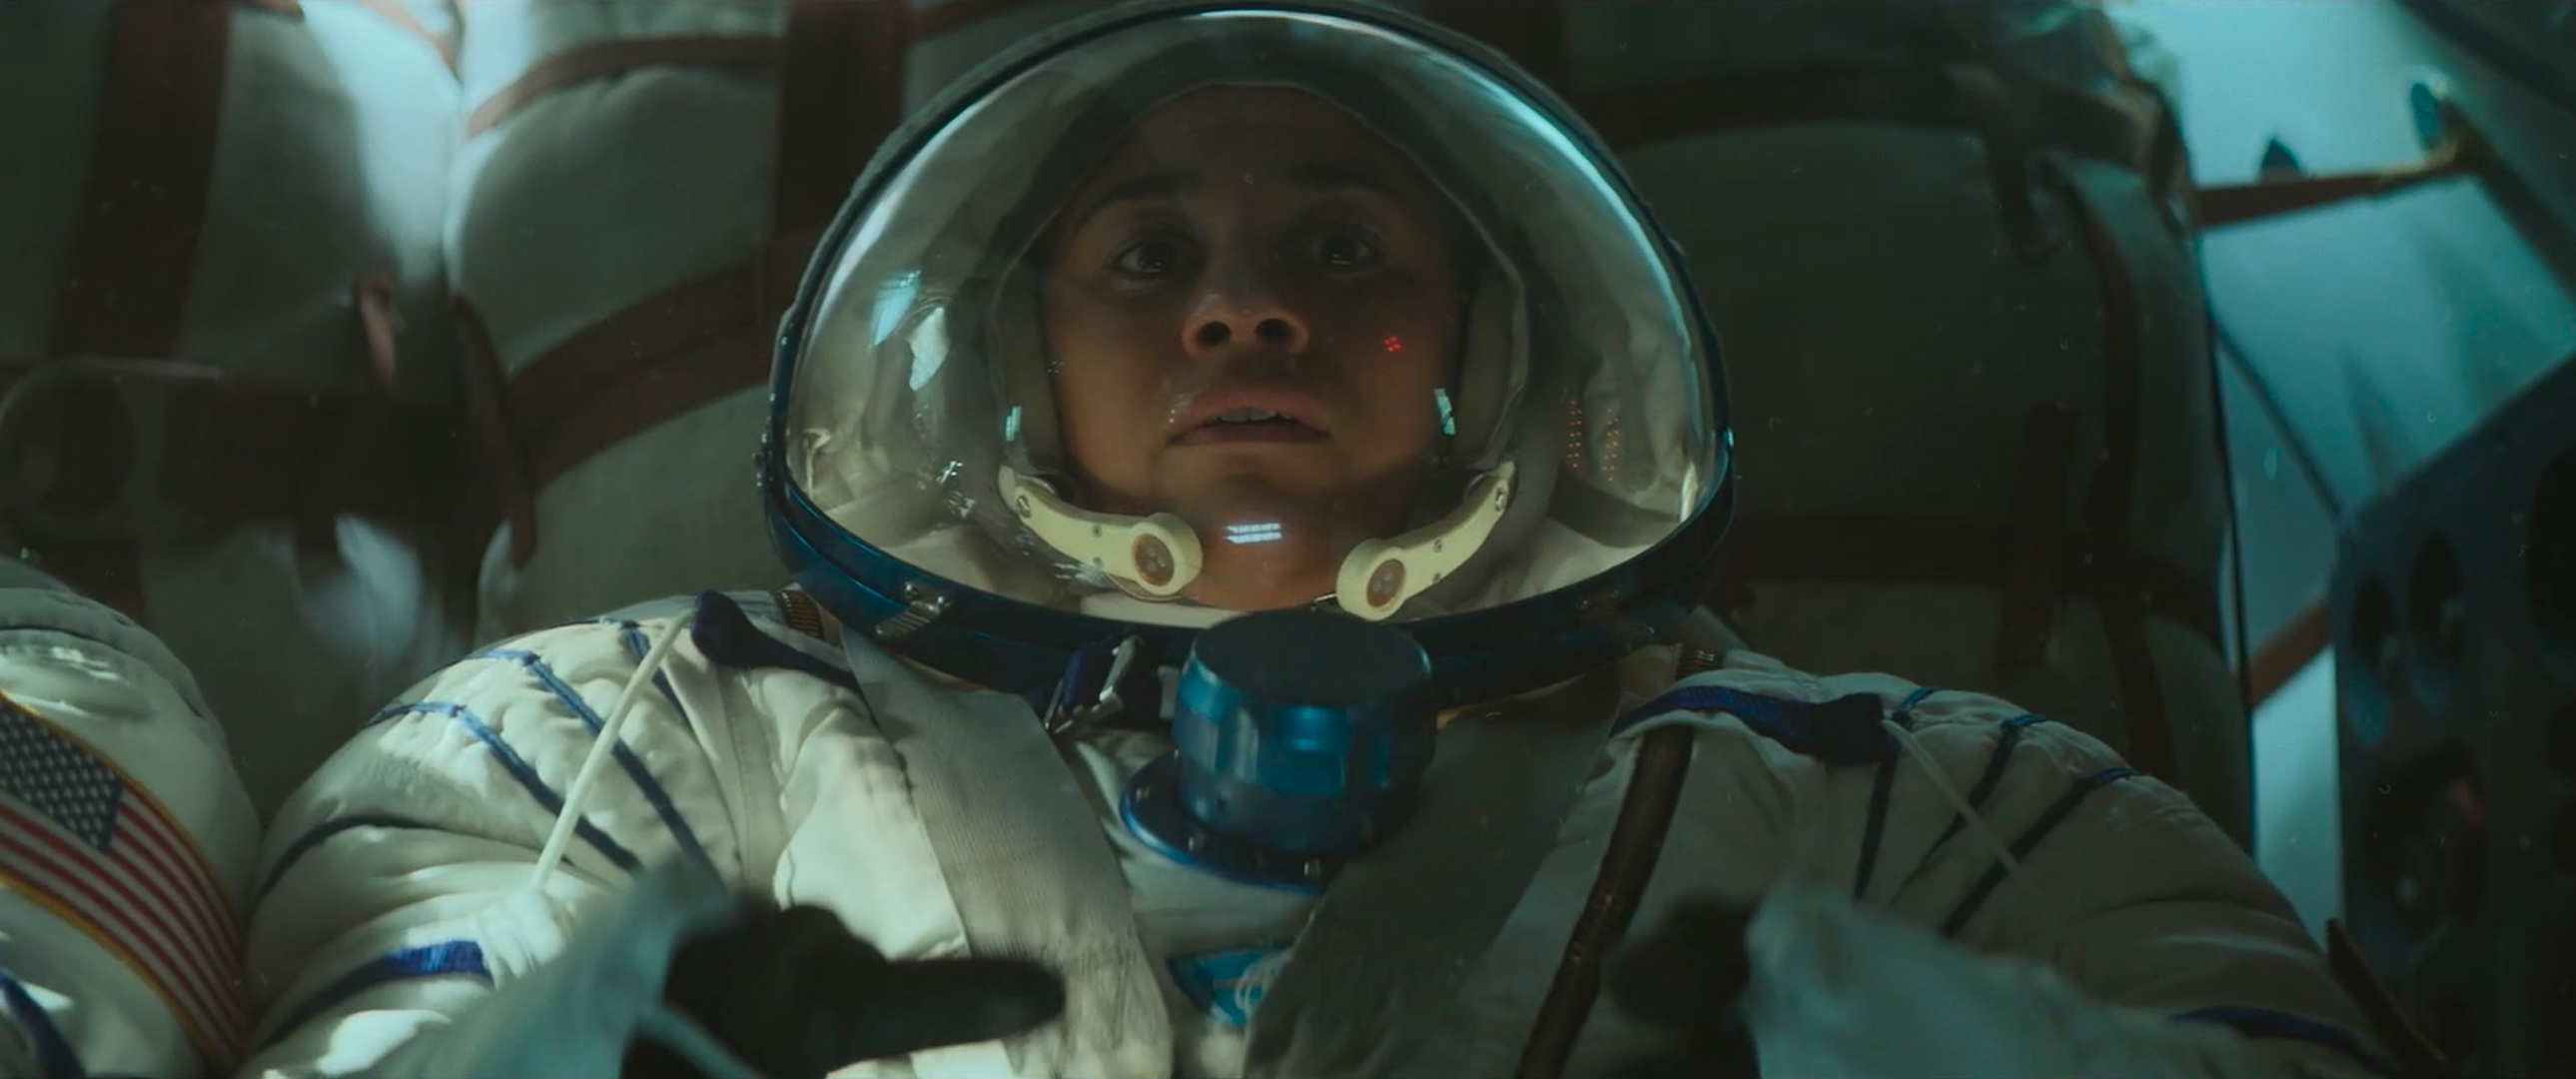 Dr. Kira Foster (Ariana DeBose) looks nervous in her full-body spacesuit and helmet in a close-up shot in I.S.S.